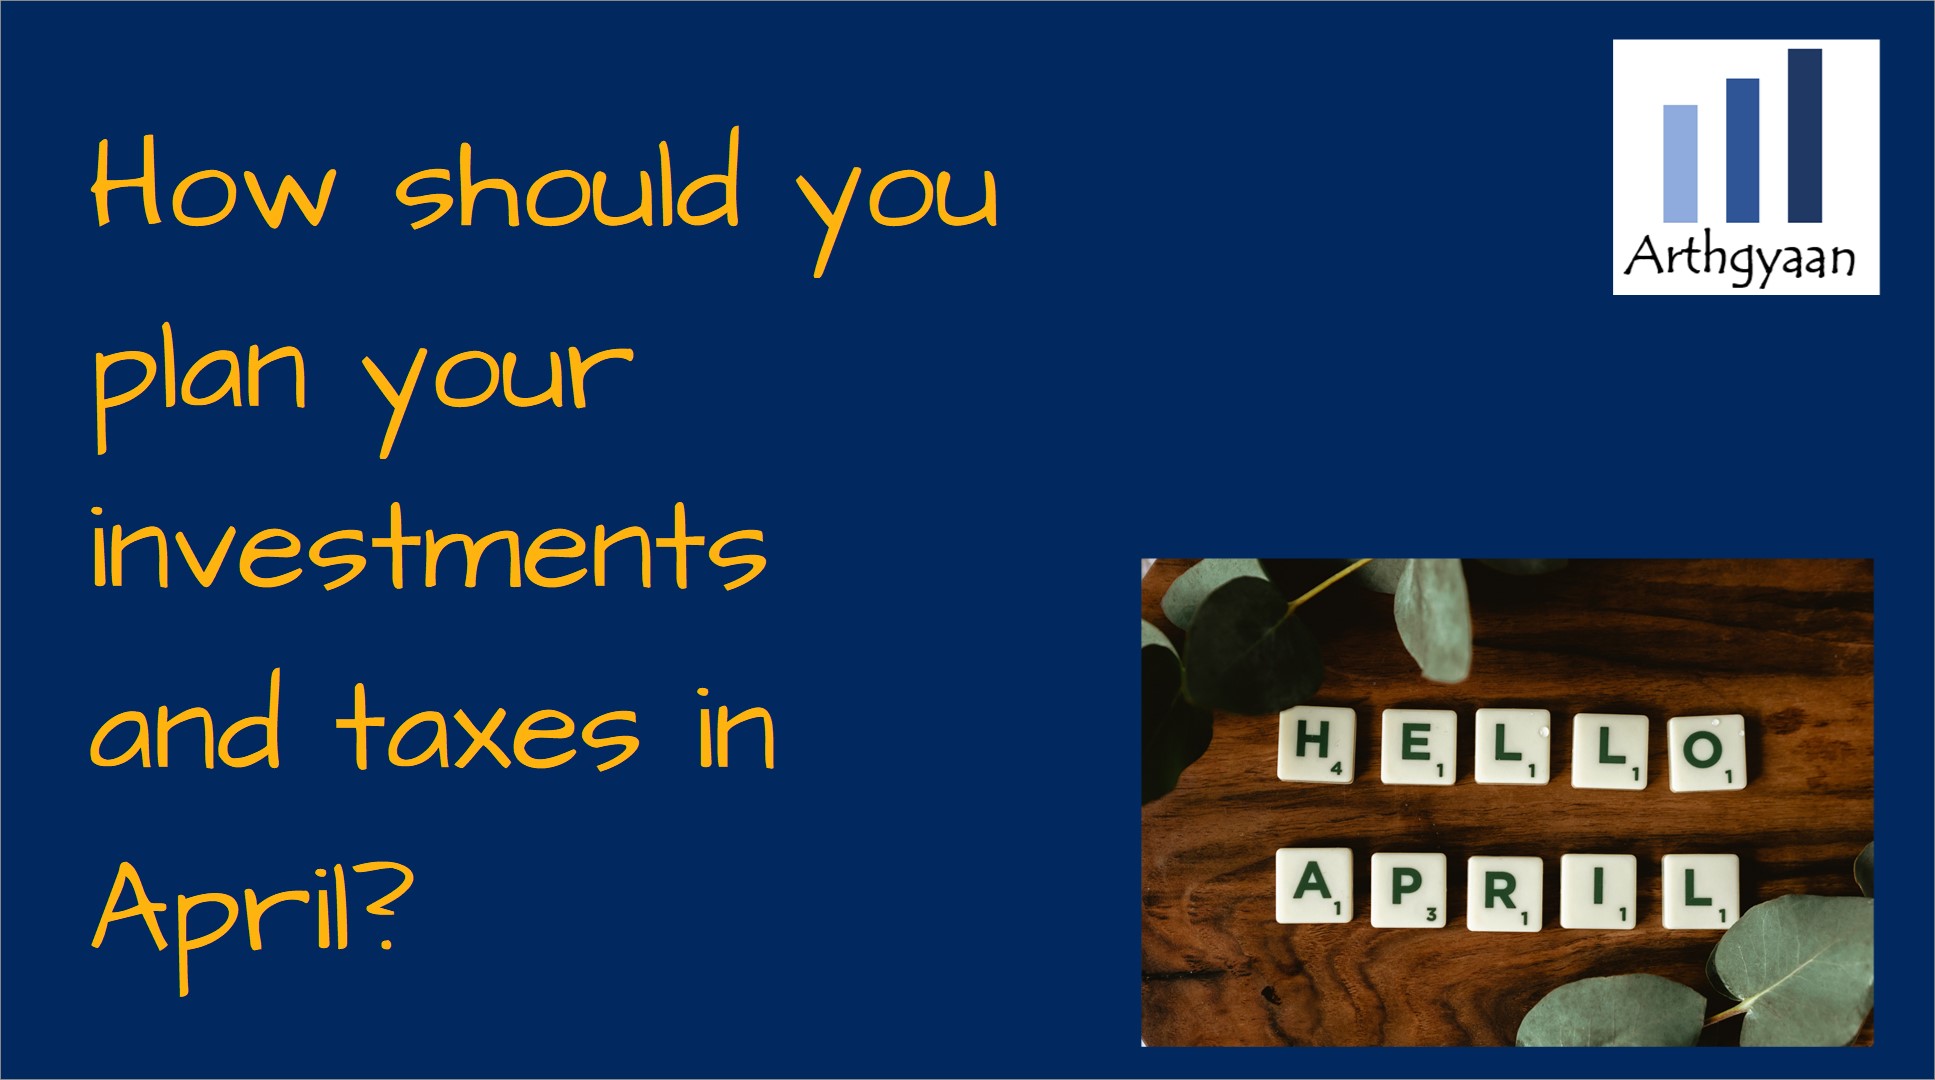 How should you plan your investments and taxes in April?